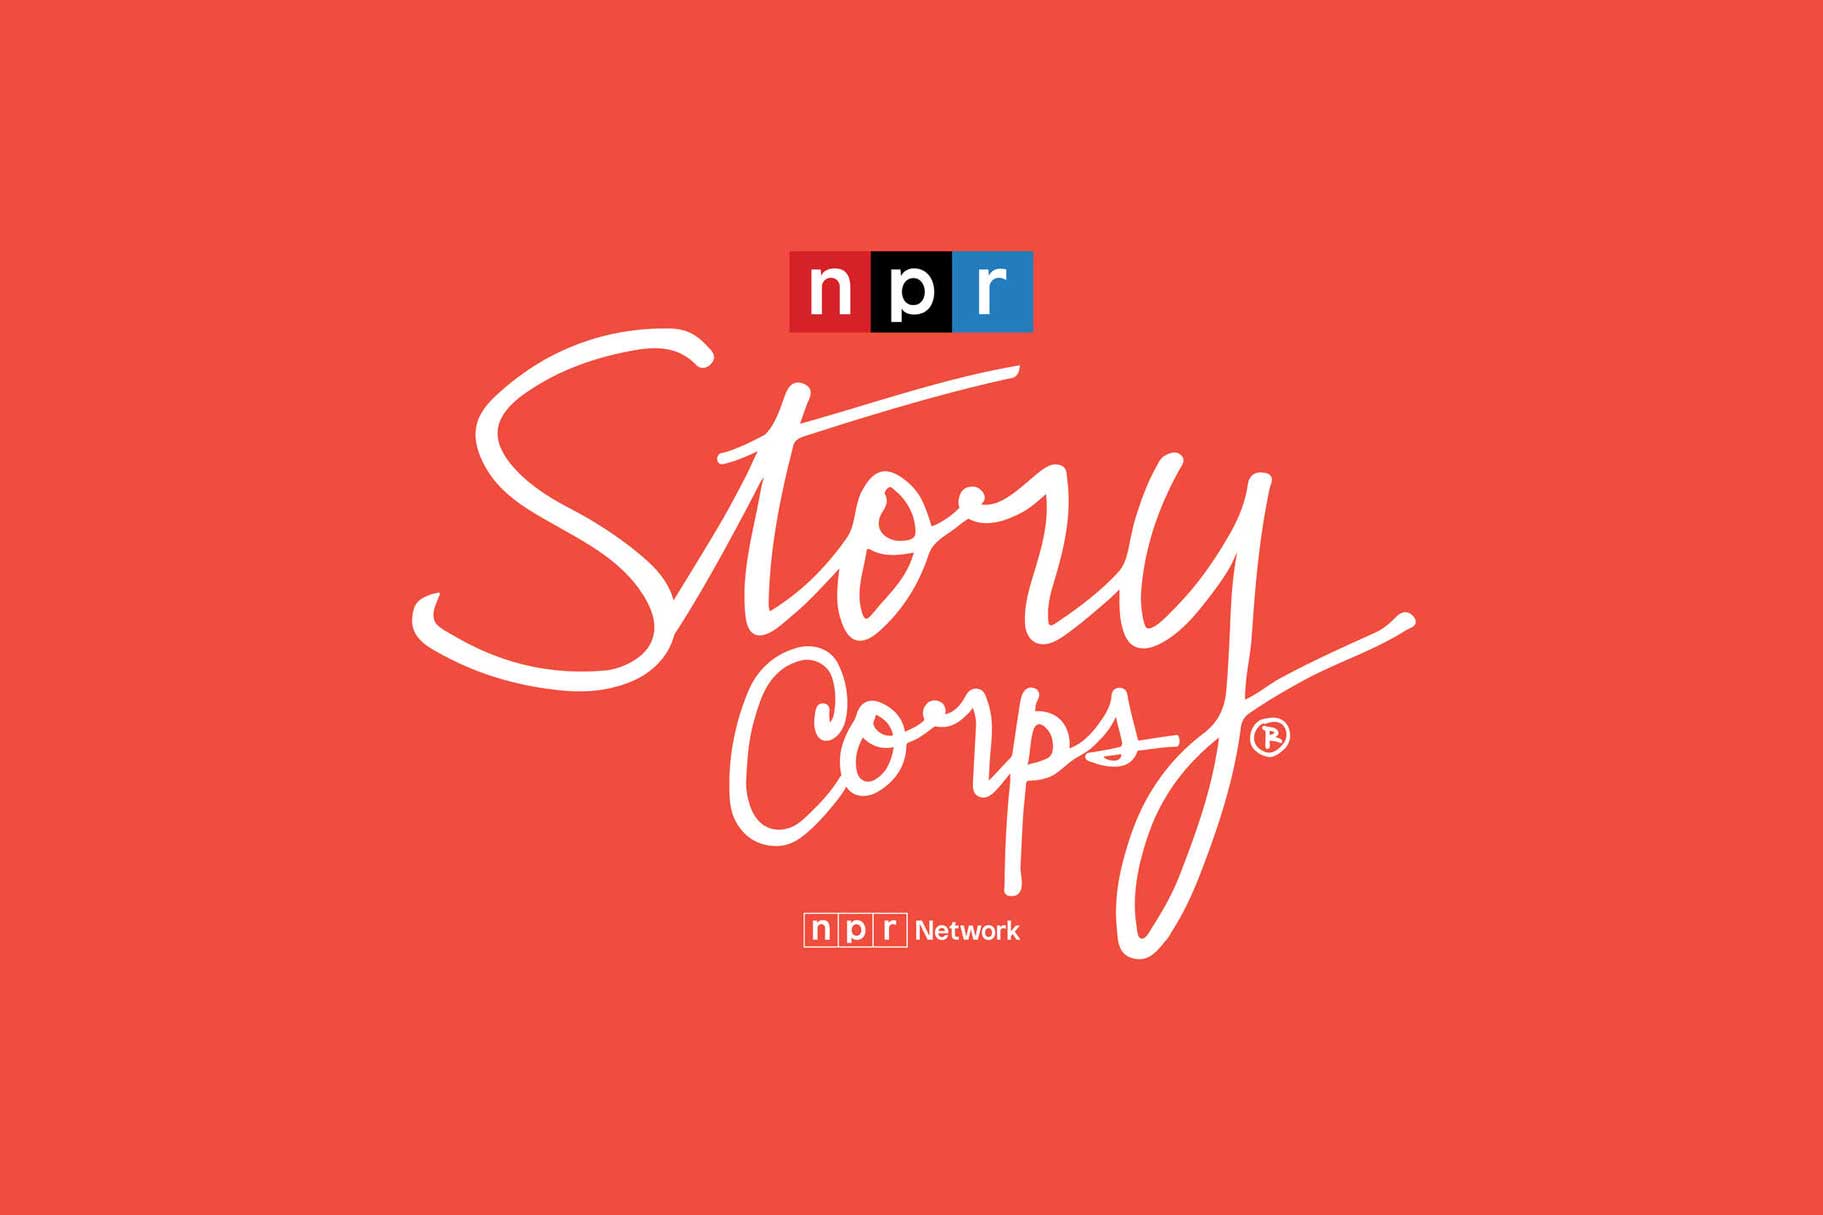 story-corps-cover-npr-4x6